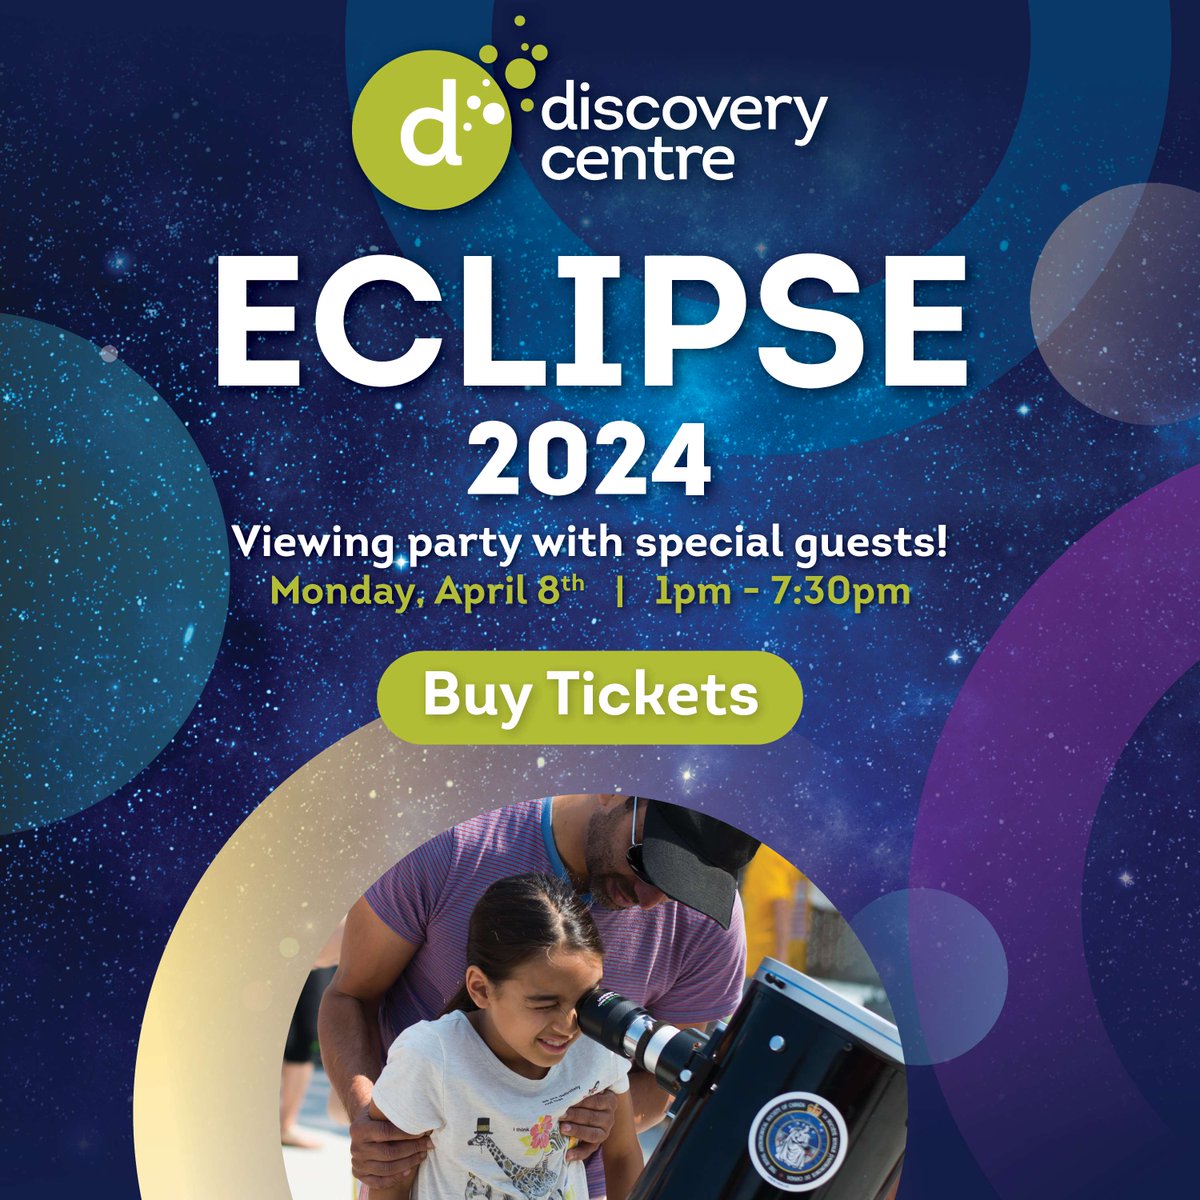 Experience the wonders of space at Discovery Centre's Solar Eclipse Event on April 8th! Witness the eclipse through solar telescopes and safe viewing practices, explore a galaxy of activities, visit thediscoverycentre.ca/eclipse-2024-v…